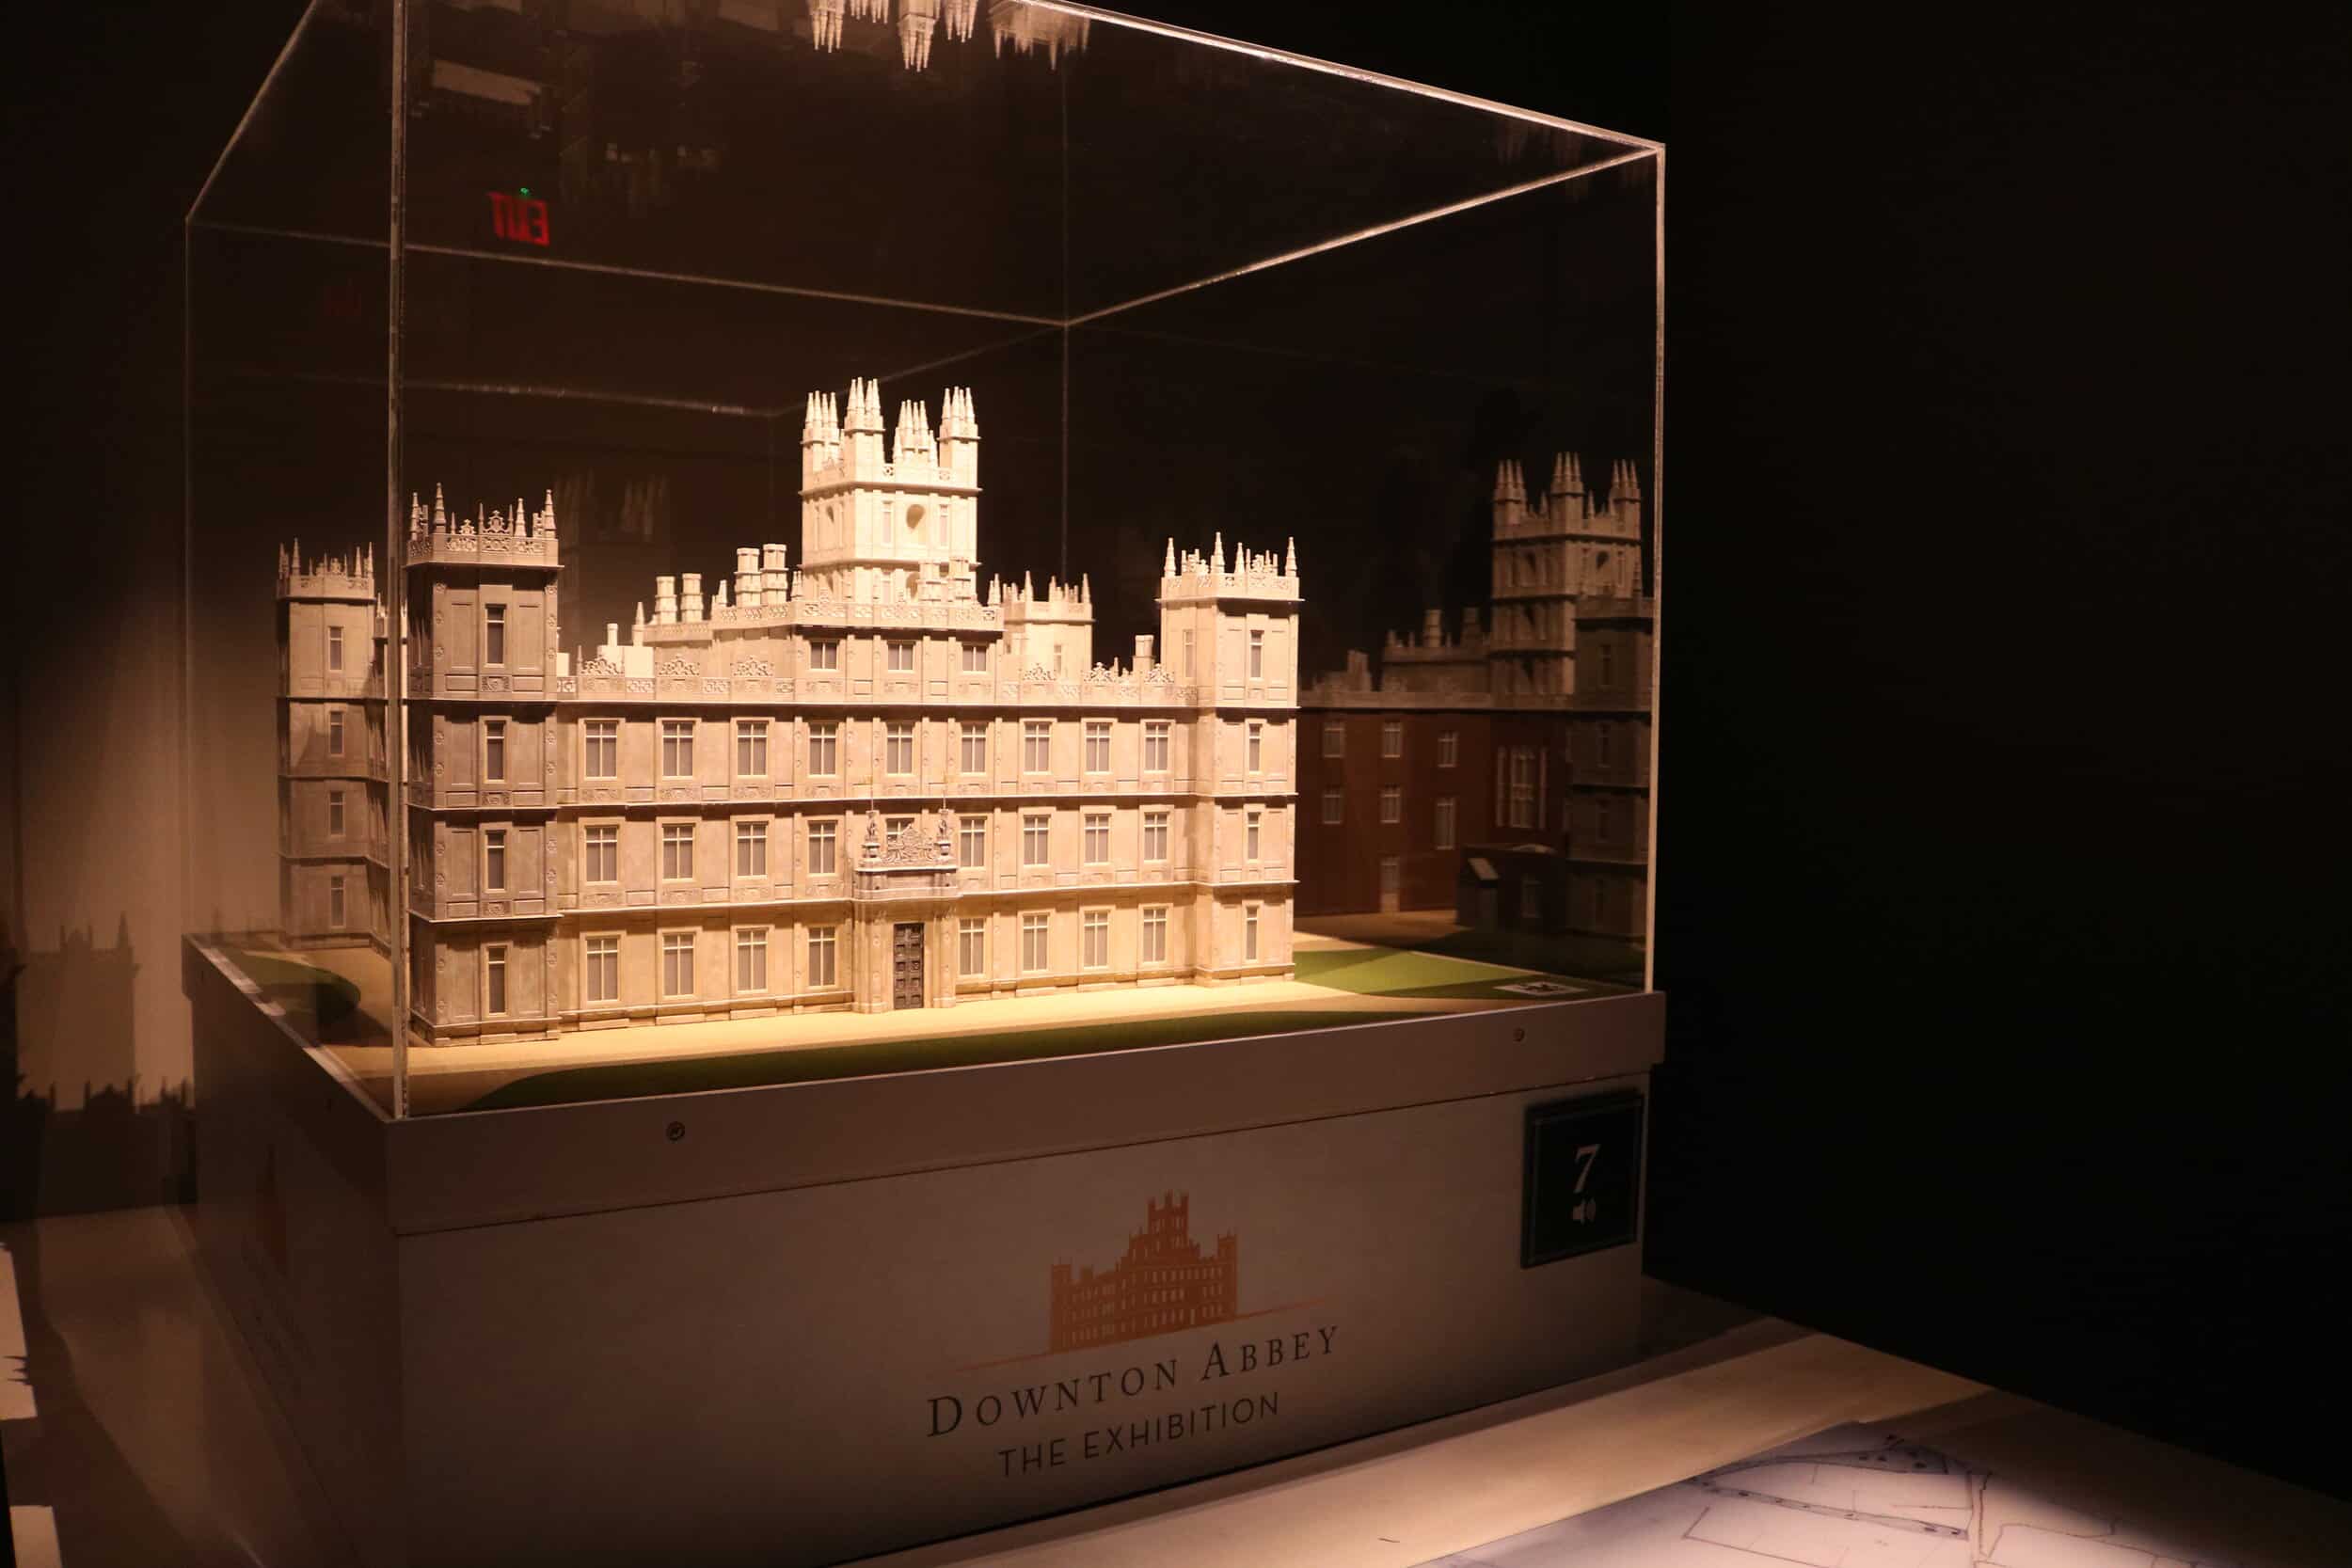 A 3D model of Highclerc Castle, which is the real life castle that is used to film the show, and now the new Downton Abbey movie.